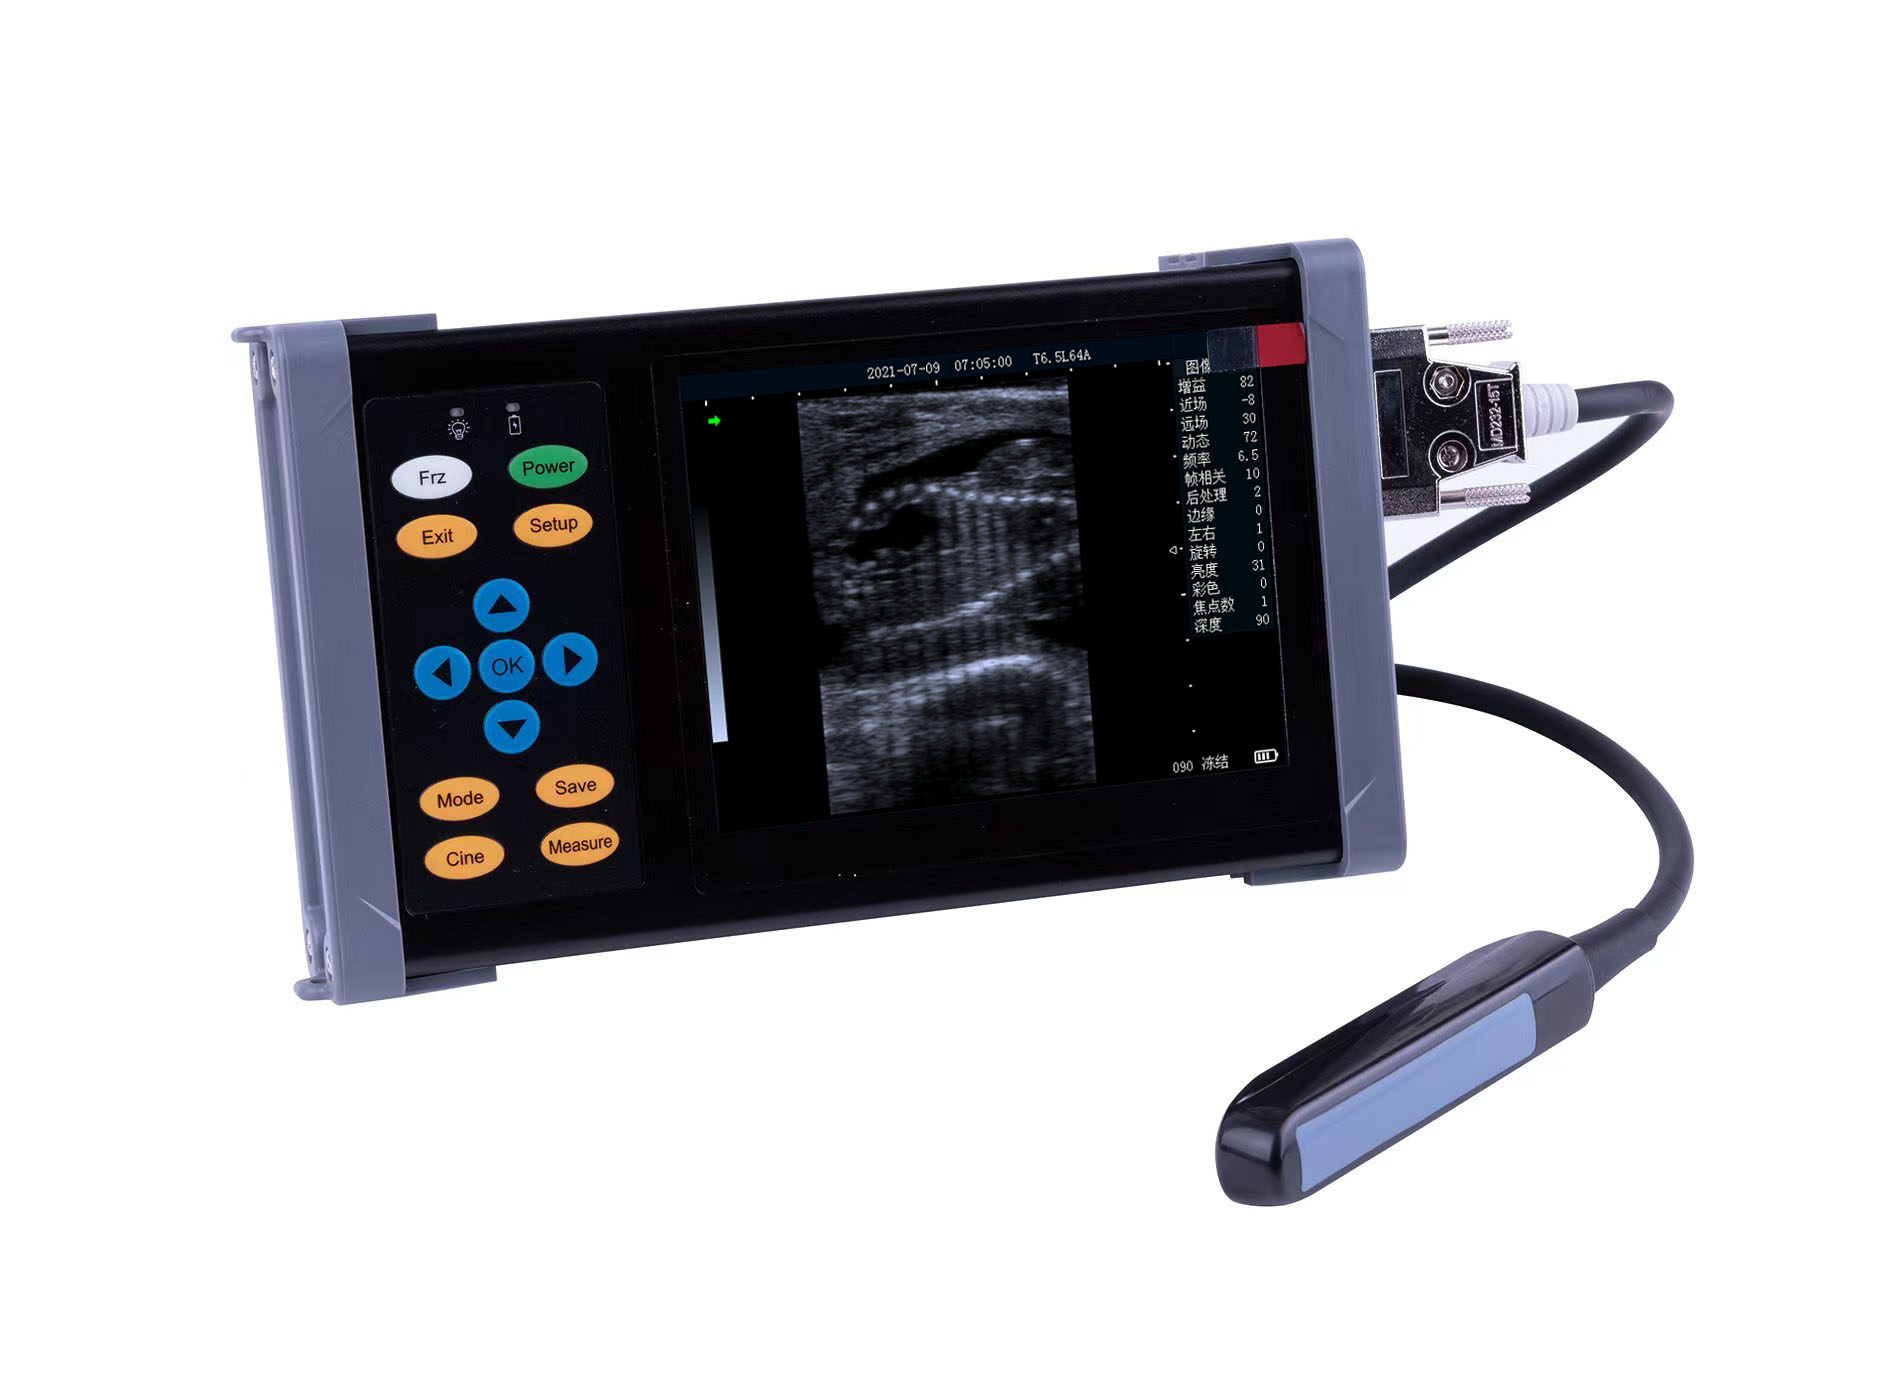 Portable ultrasound scanner for farm animal pregnancy, what is the benefit for farmers?